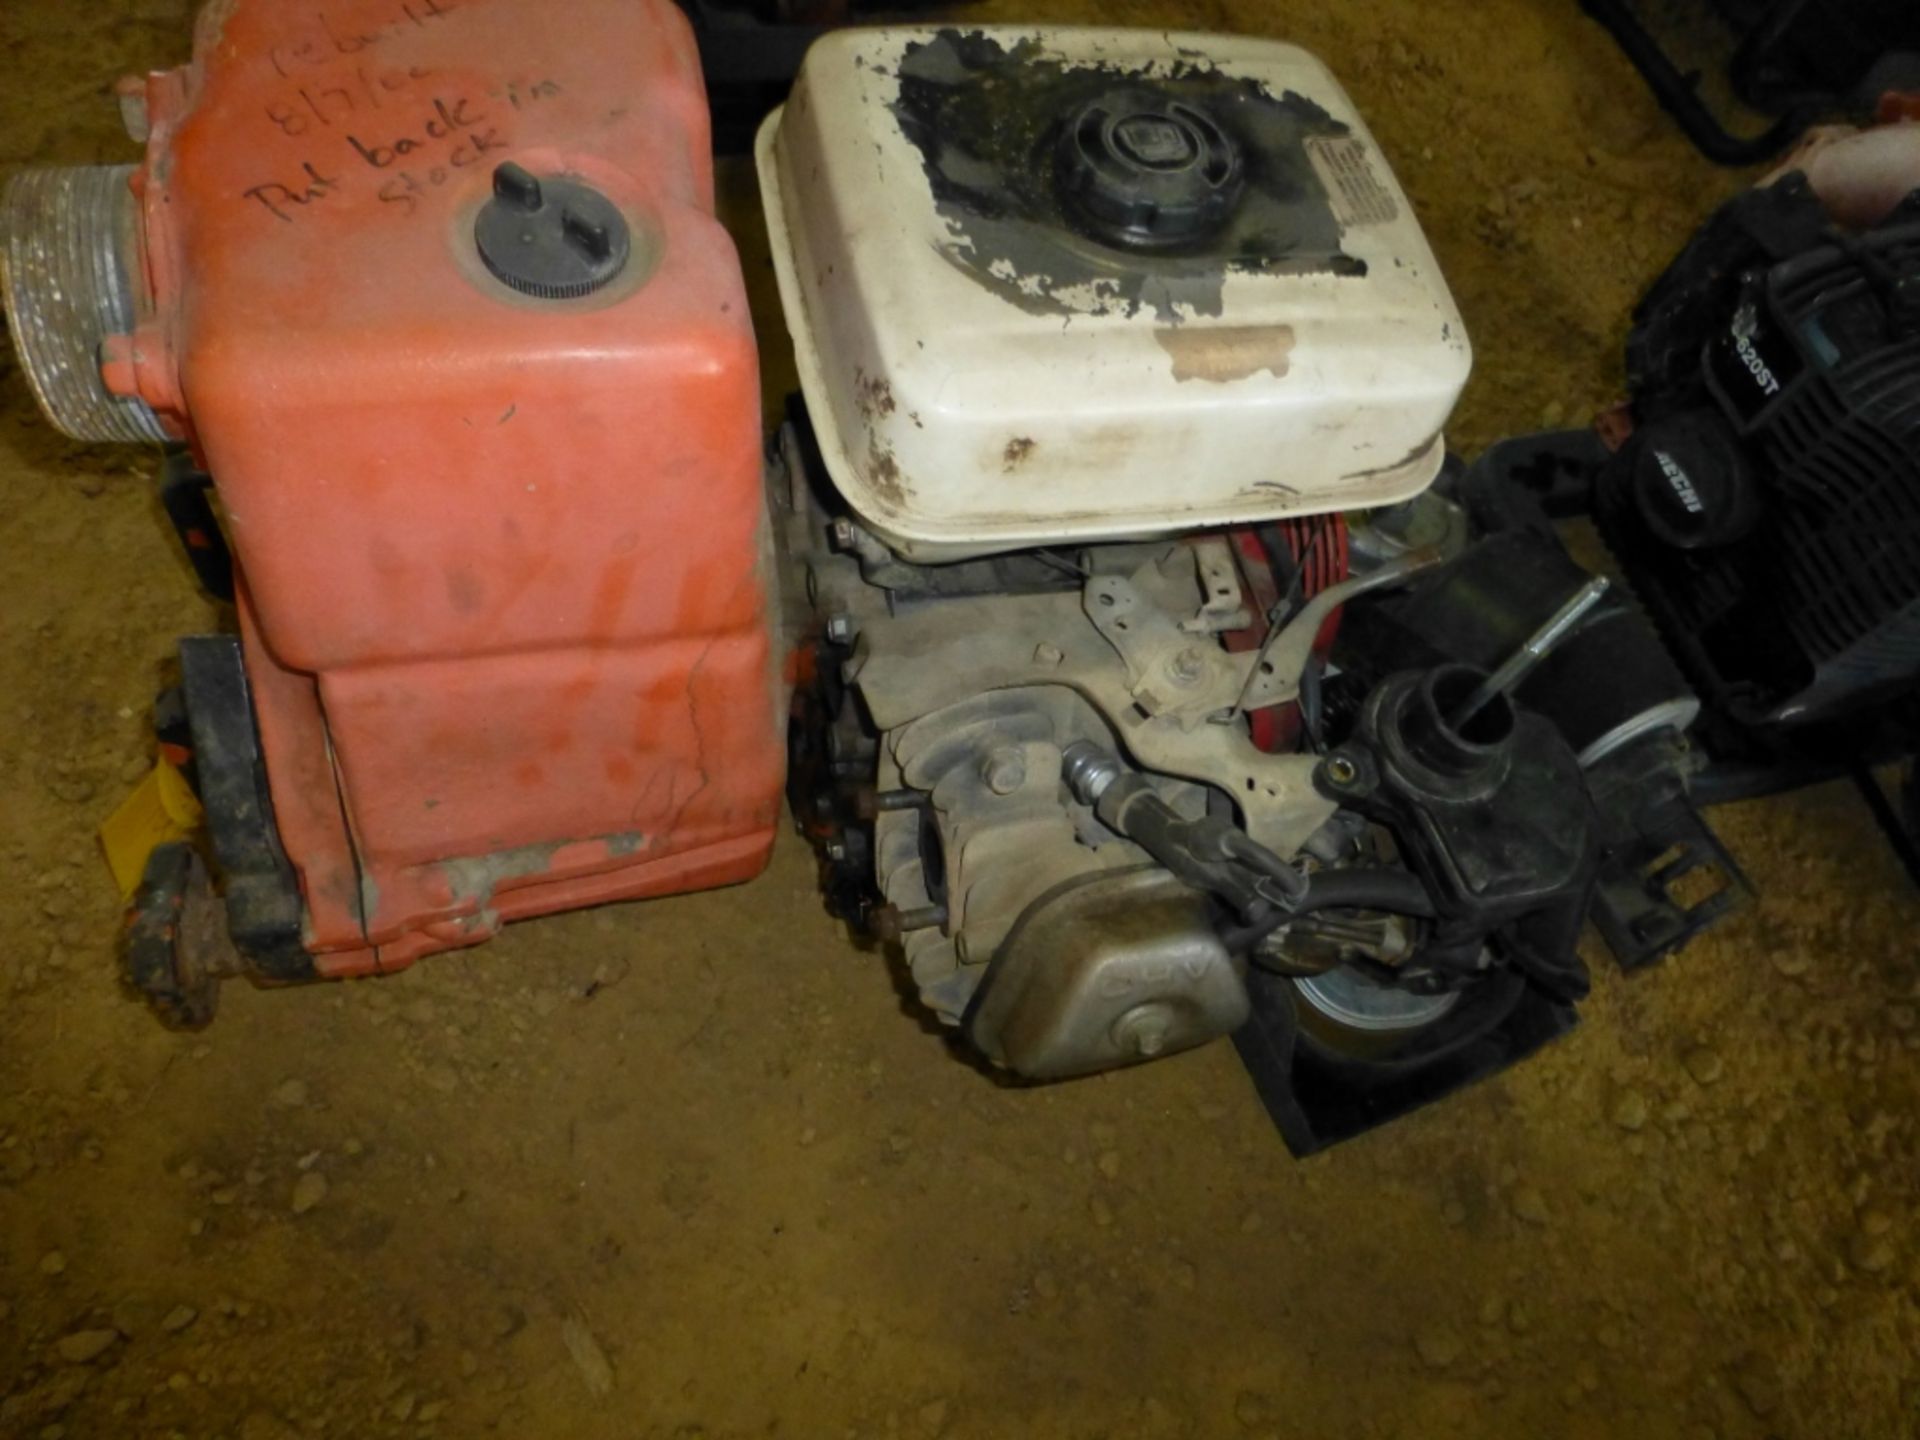 8 hp honda engine with pump, missing parts, sells with Echo blower - Image 4 of 8